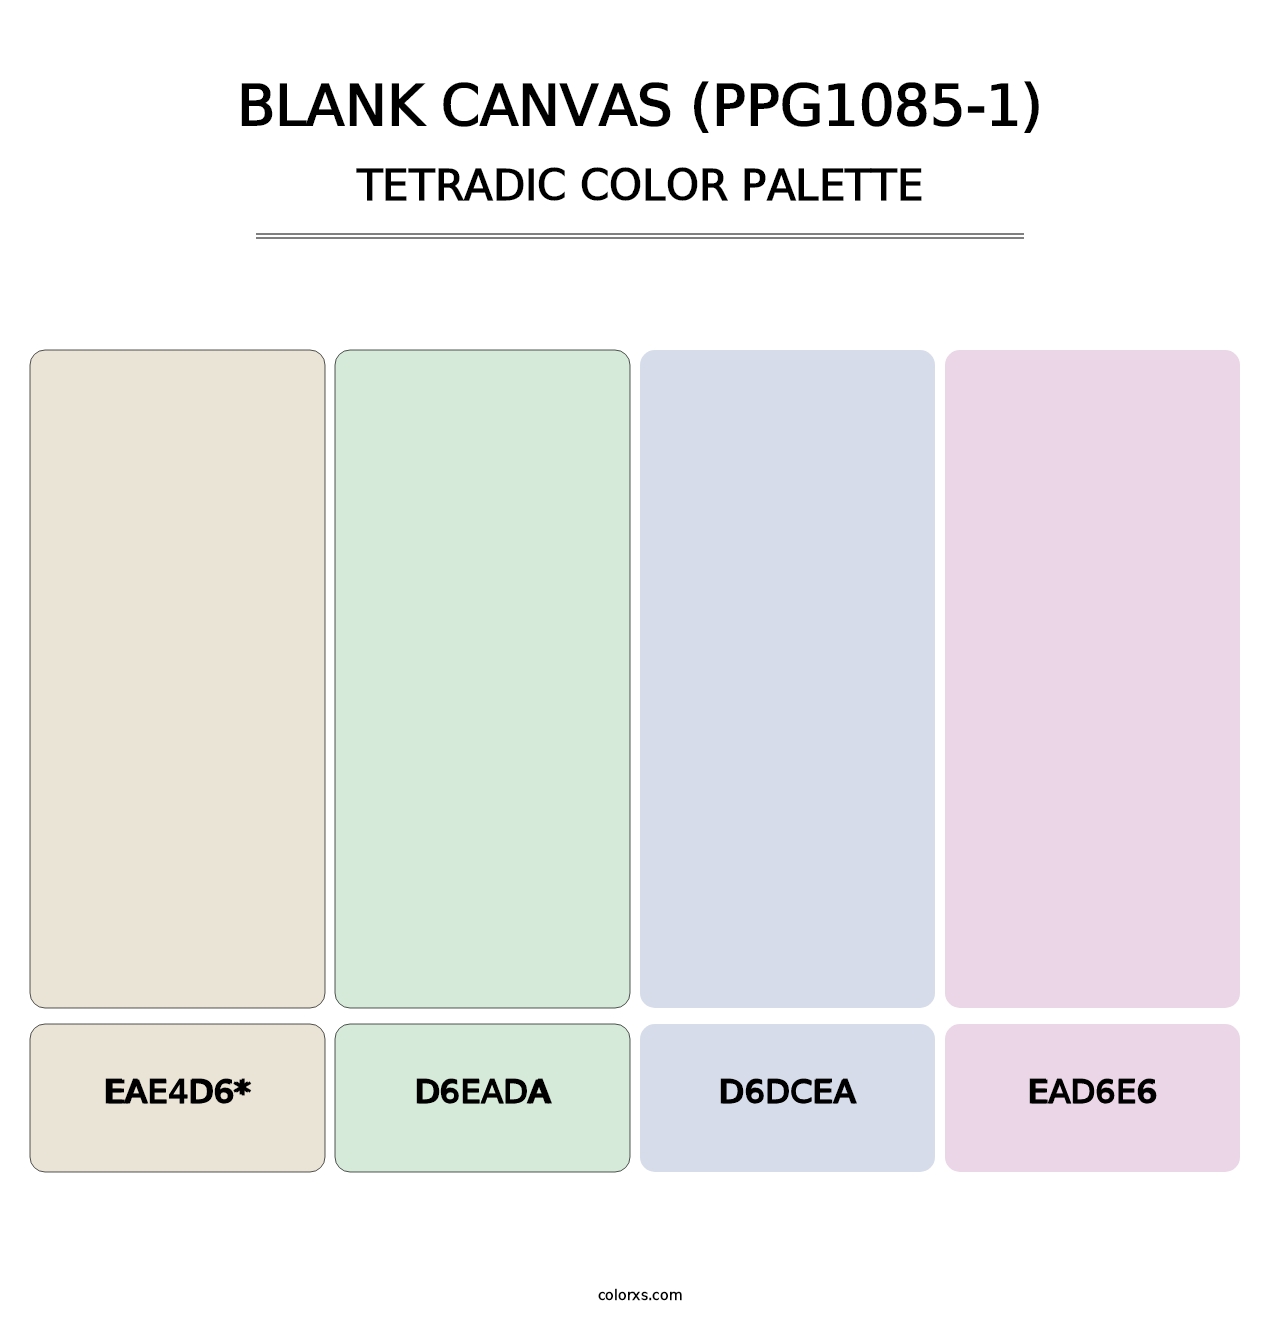 Blank Canvas (PPG1085-1) - Tetradic Color Palette